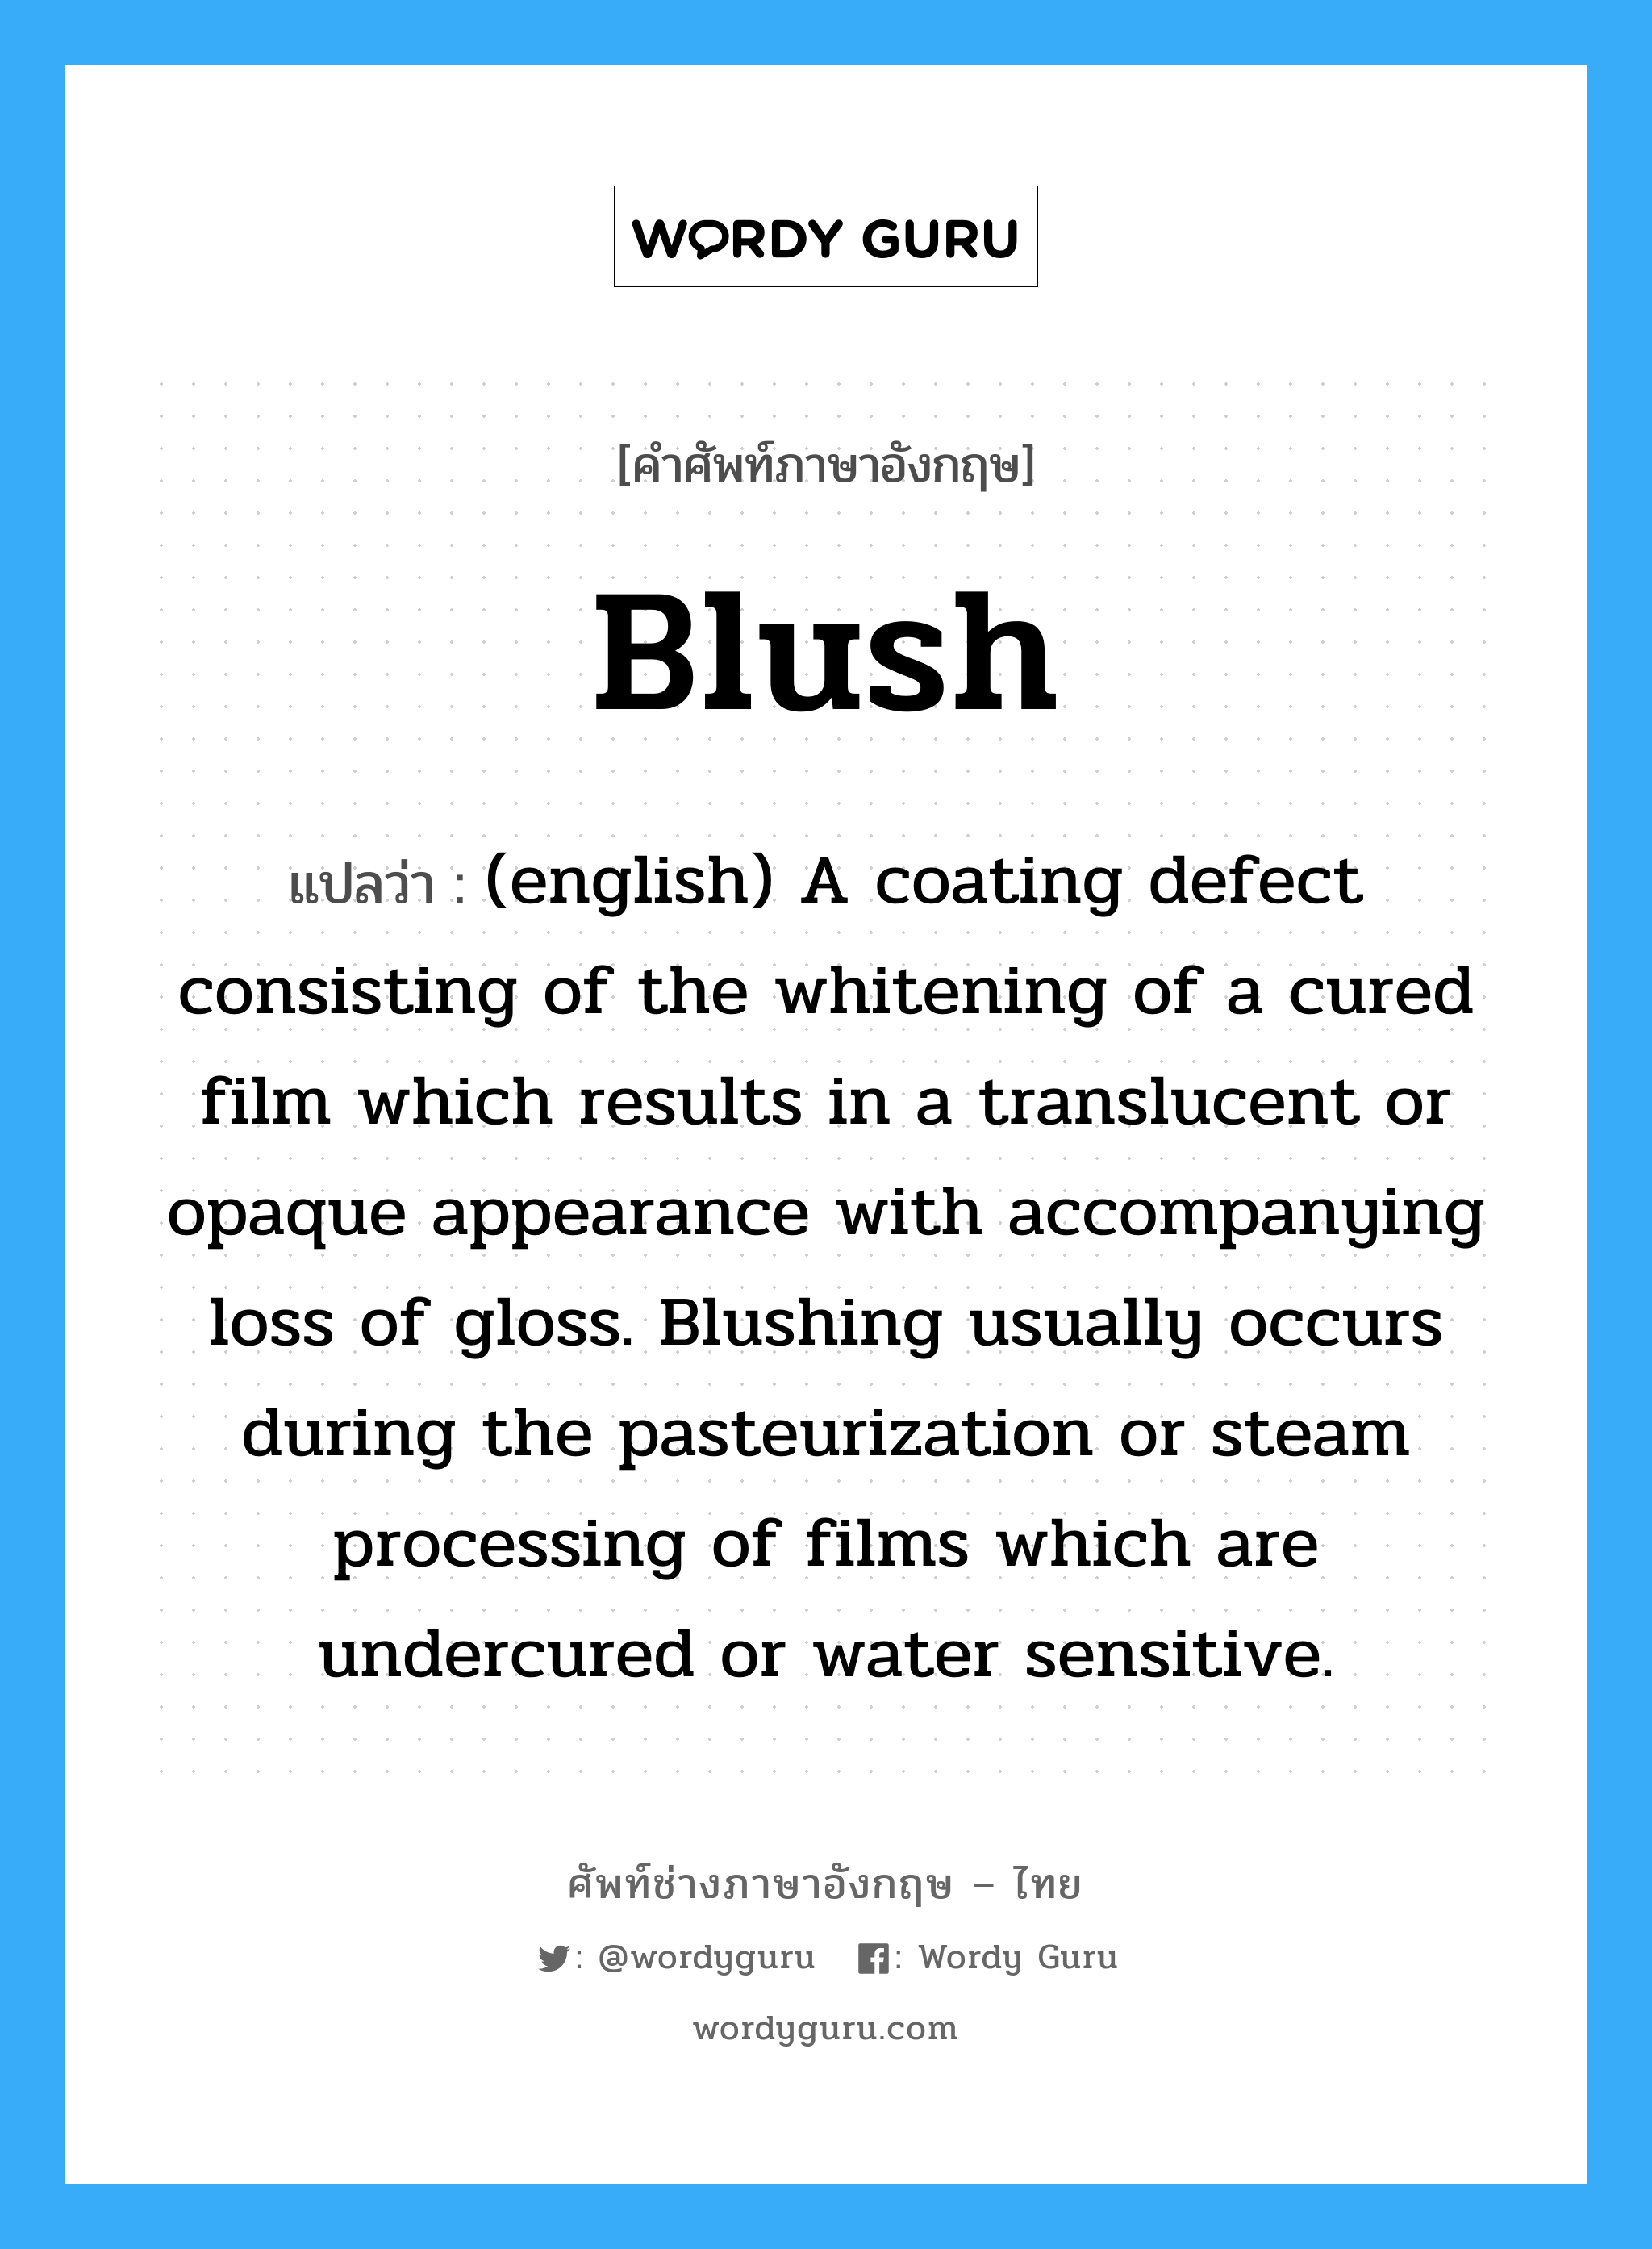 (english) A coating defect consisting of the whitening of a cured film which results in a translucent or opaque appearance with accompanying loss of gloss. Blushing usually occurs during the pasteurization or steam processing of films which are undercured or water sensitive. ภาษาอังกฤษ?, คำศัพท์ช่างภาษาอังกฤษ - ไทย (english) A coating defect consisting of the whitening of a cured film which results in a translucent or opaque appearance with accompanying loss of gloss. Blushing usually occurs during the pasteurization or steam processing of films which are undercured or water sensitive. คำศัพท์ภาษาอังกฤษ (english) A coating defect consisting of the whitening of a cured film which results in a translucent or opaque appearance with accompanying loss of gloss. Blushing usually occurs during the pasteurization or steam processing of films which are undercured or water sensitive. แปลว่า Blush